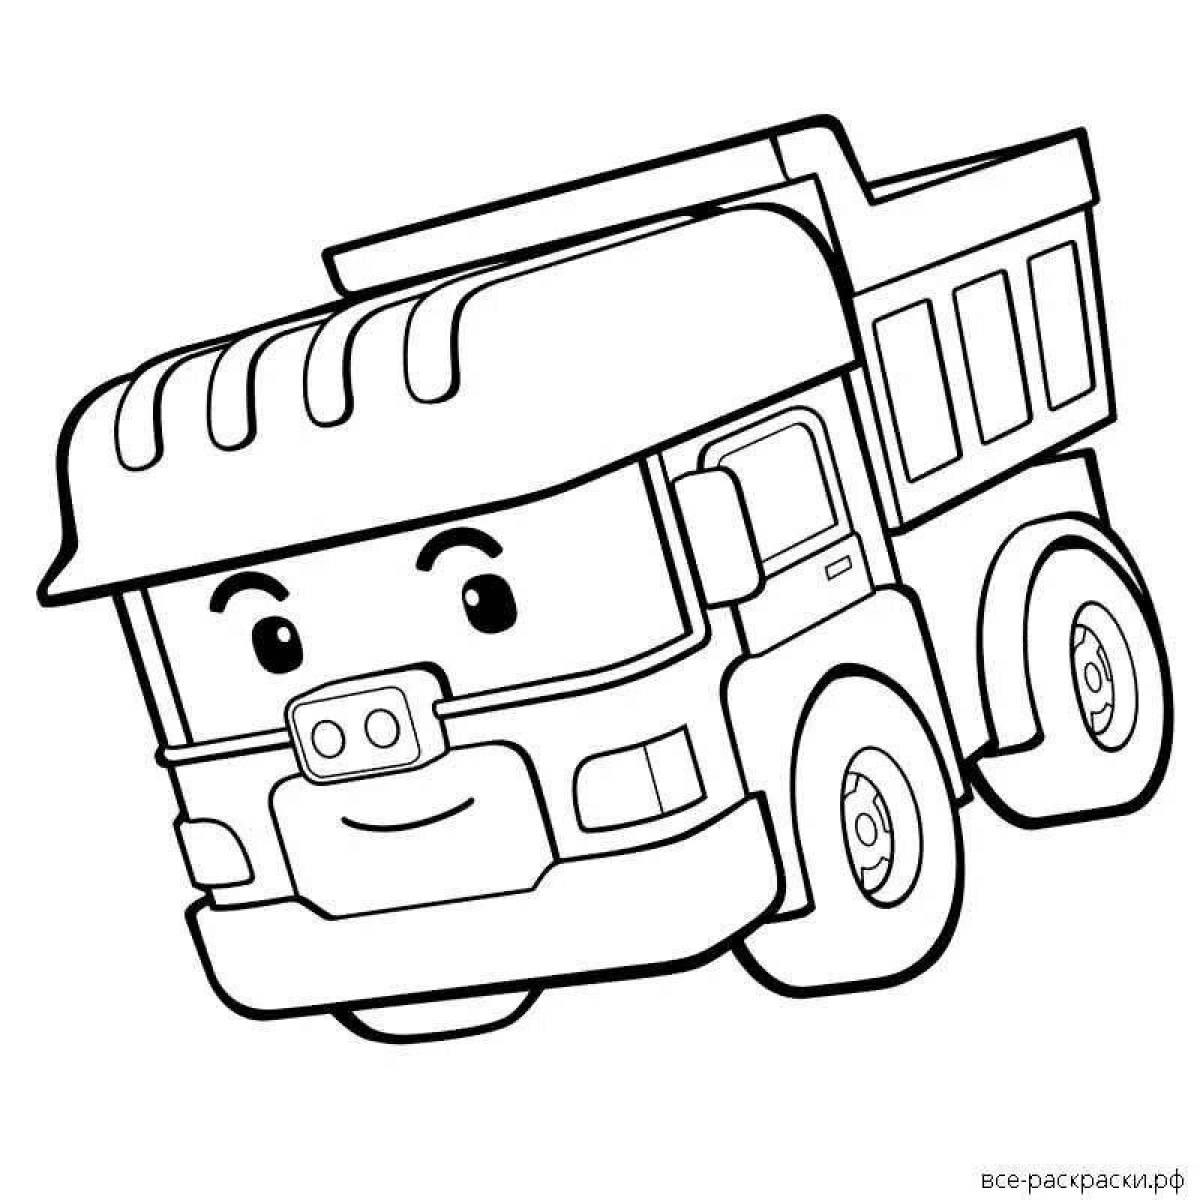 Attractive lion truck coloring book